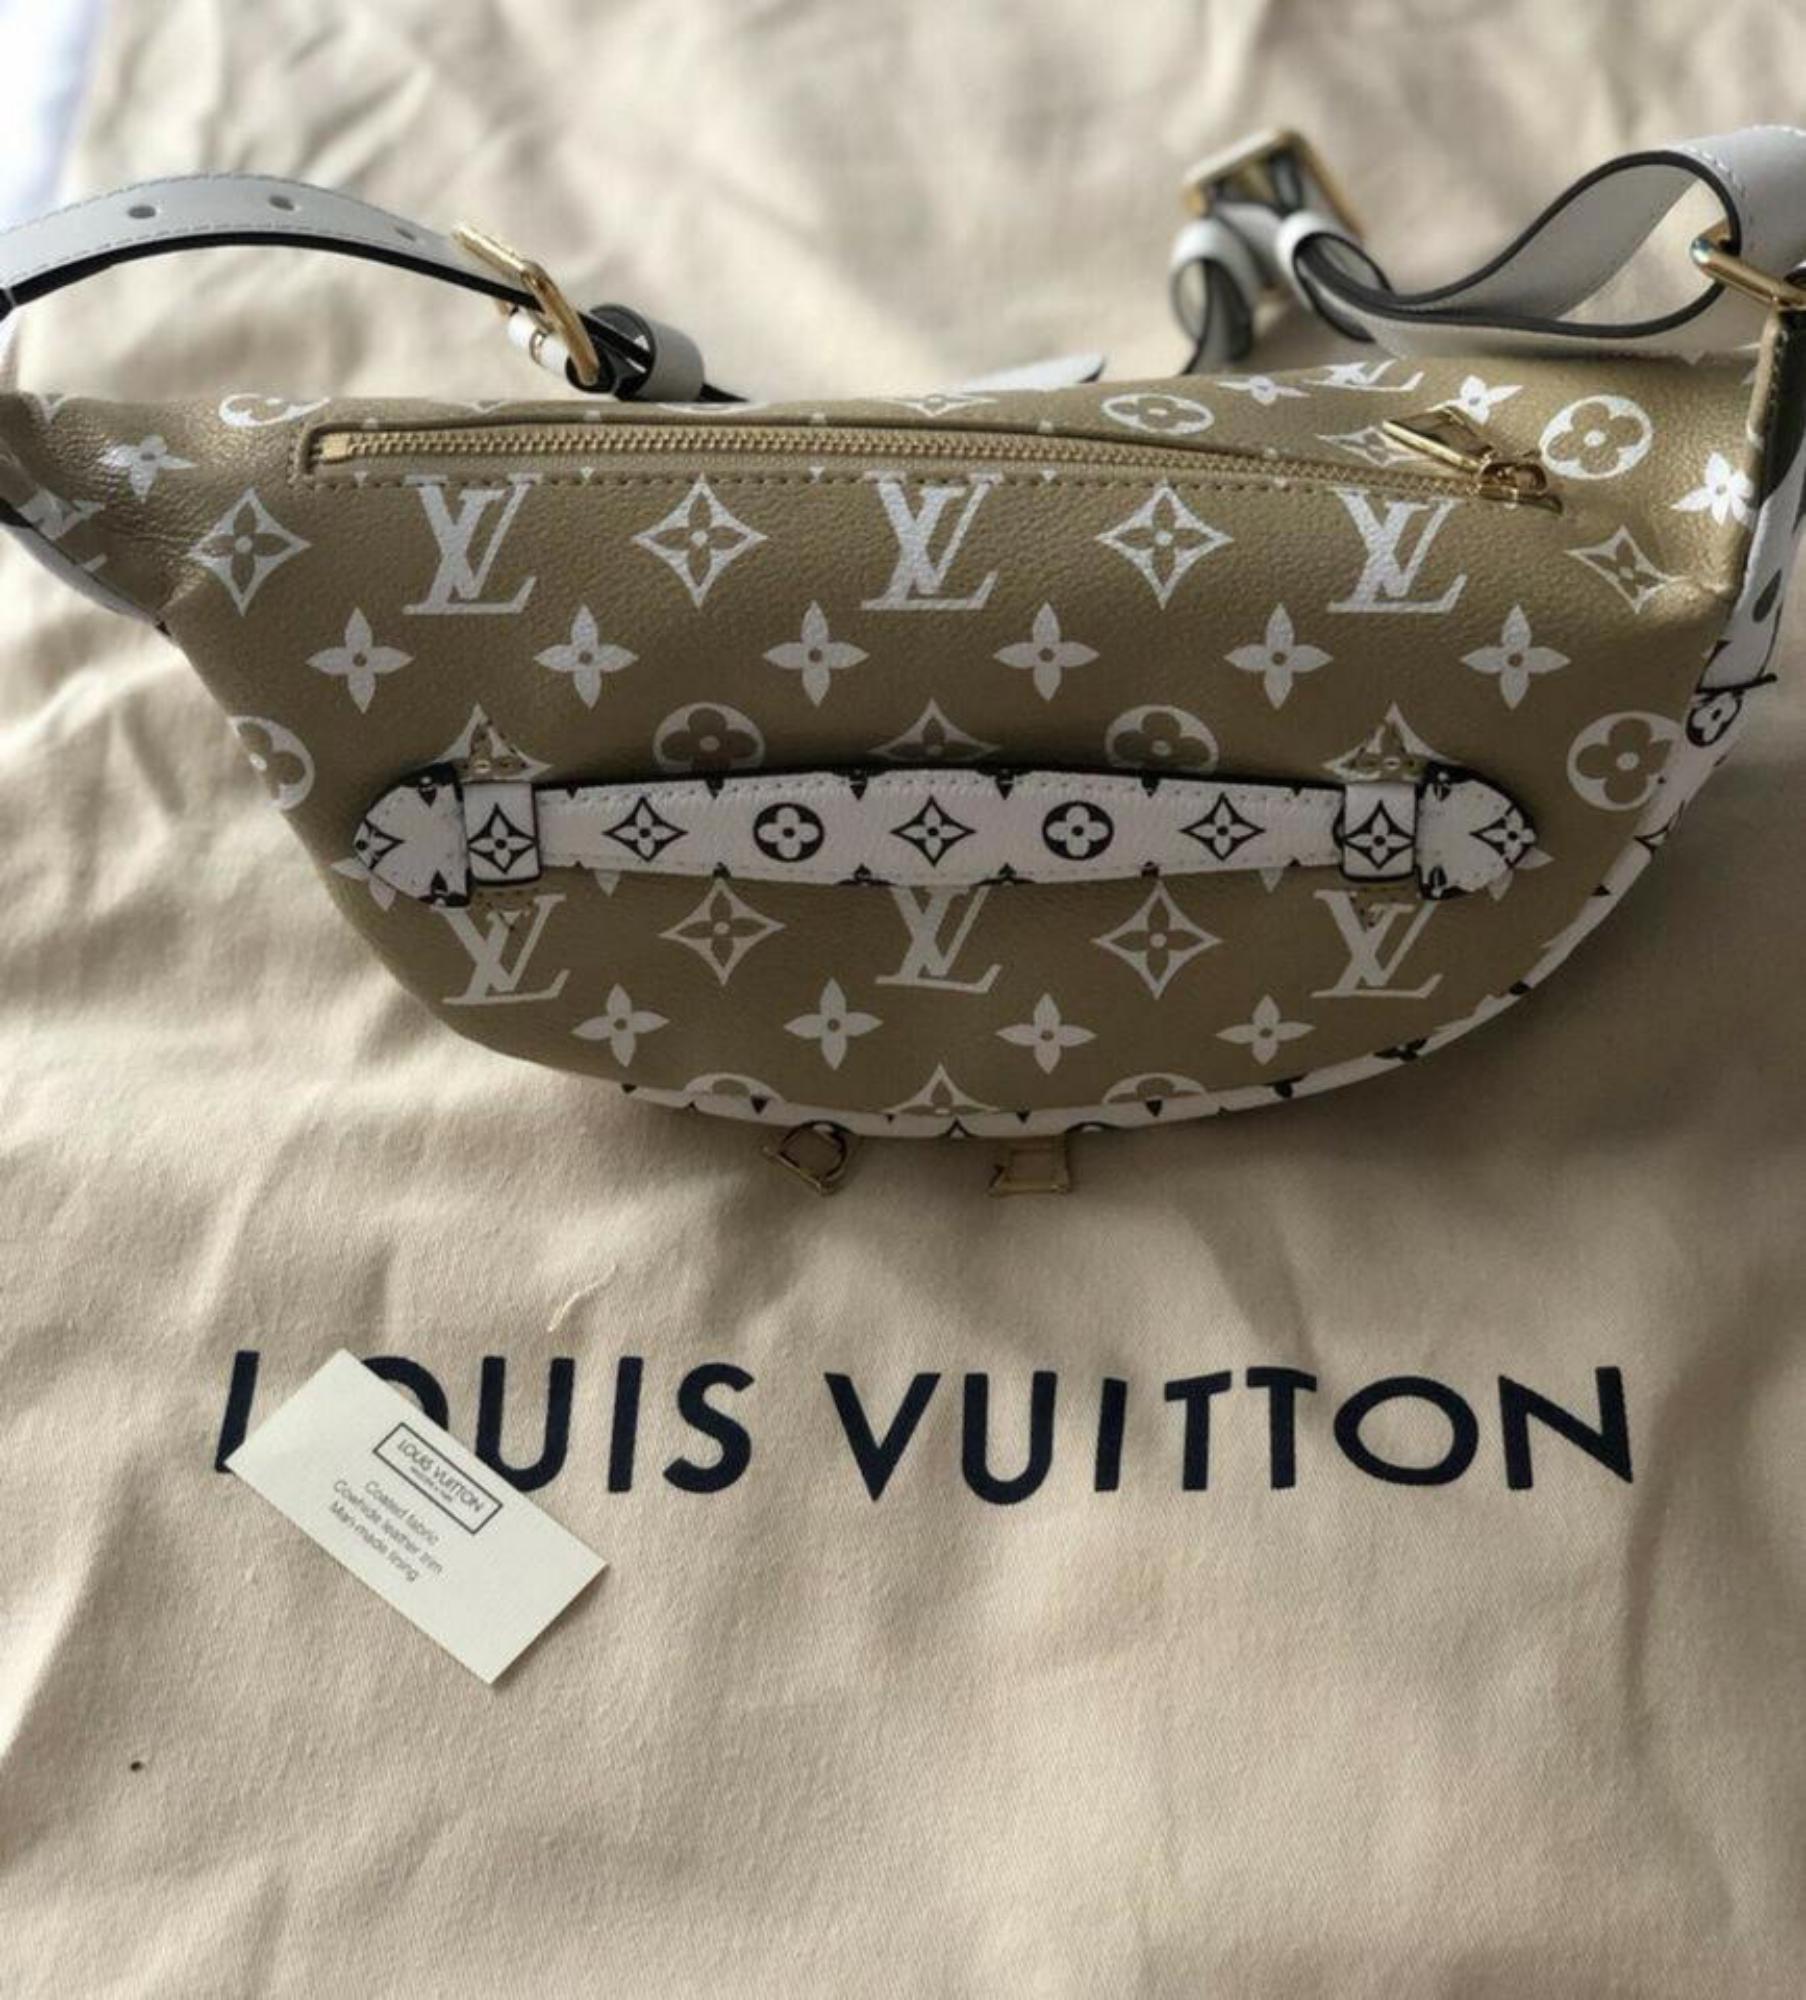 Louis Vuitton Bumbag Giant Limited Fanny Pack Waist Pouch 870621 Cross Body Bag For Sale 4